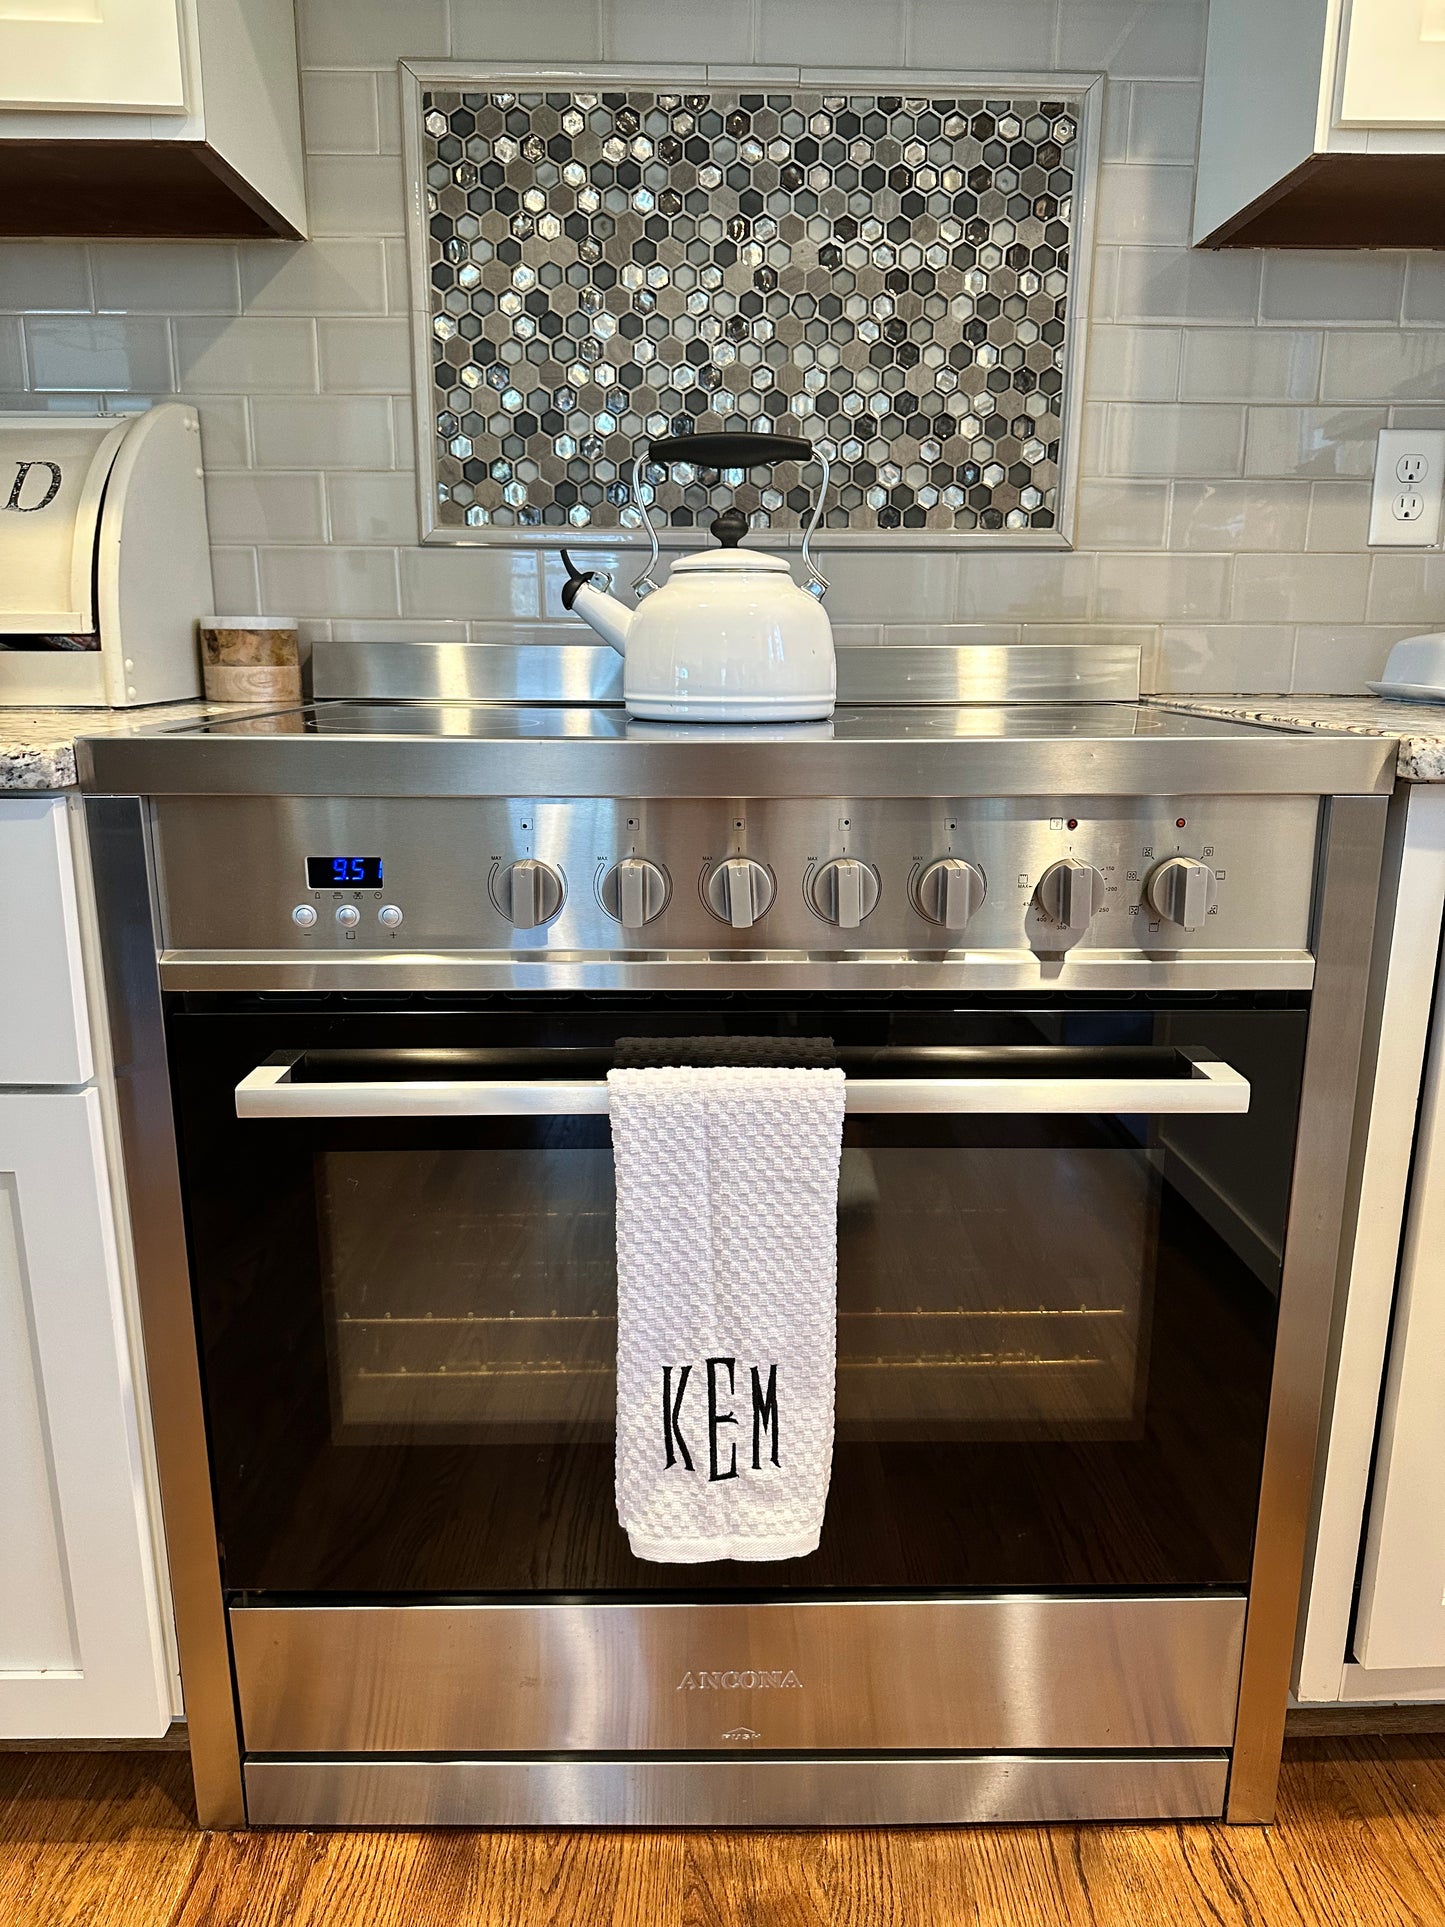 Monogrammed Personalized Kitchen Towels -Cotton- Embroidered-Choose your Colors - Monogrammed